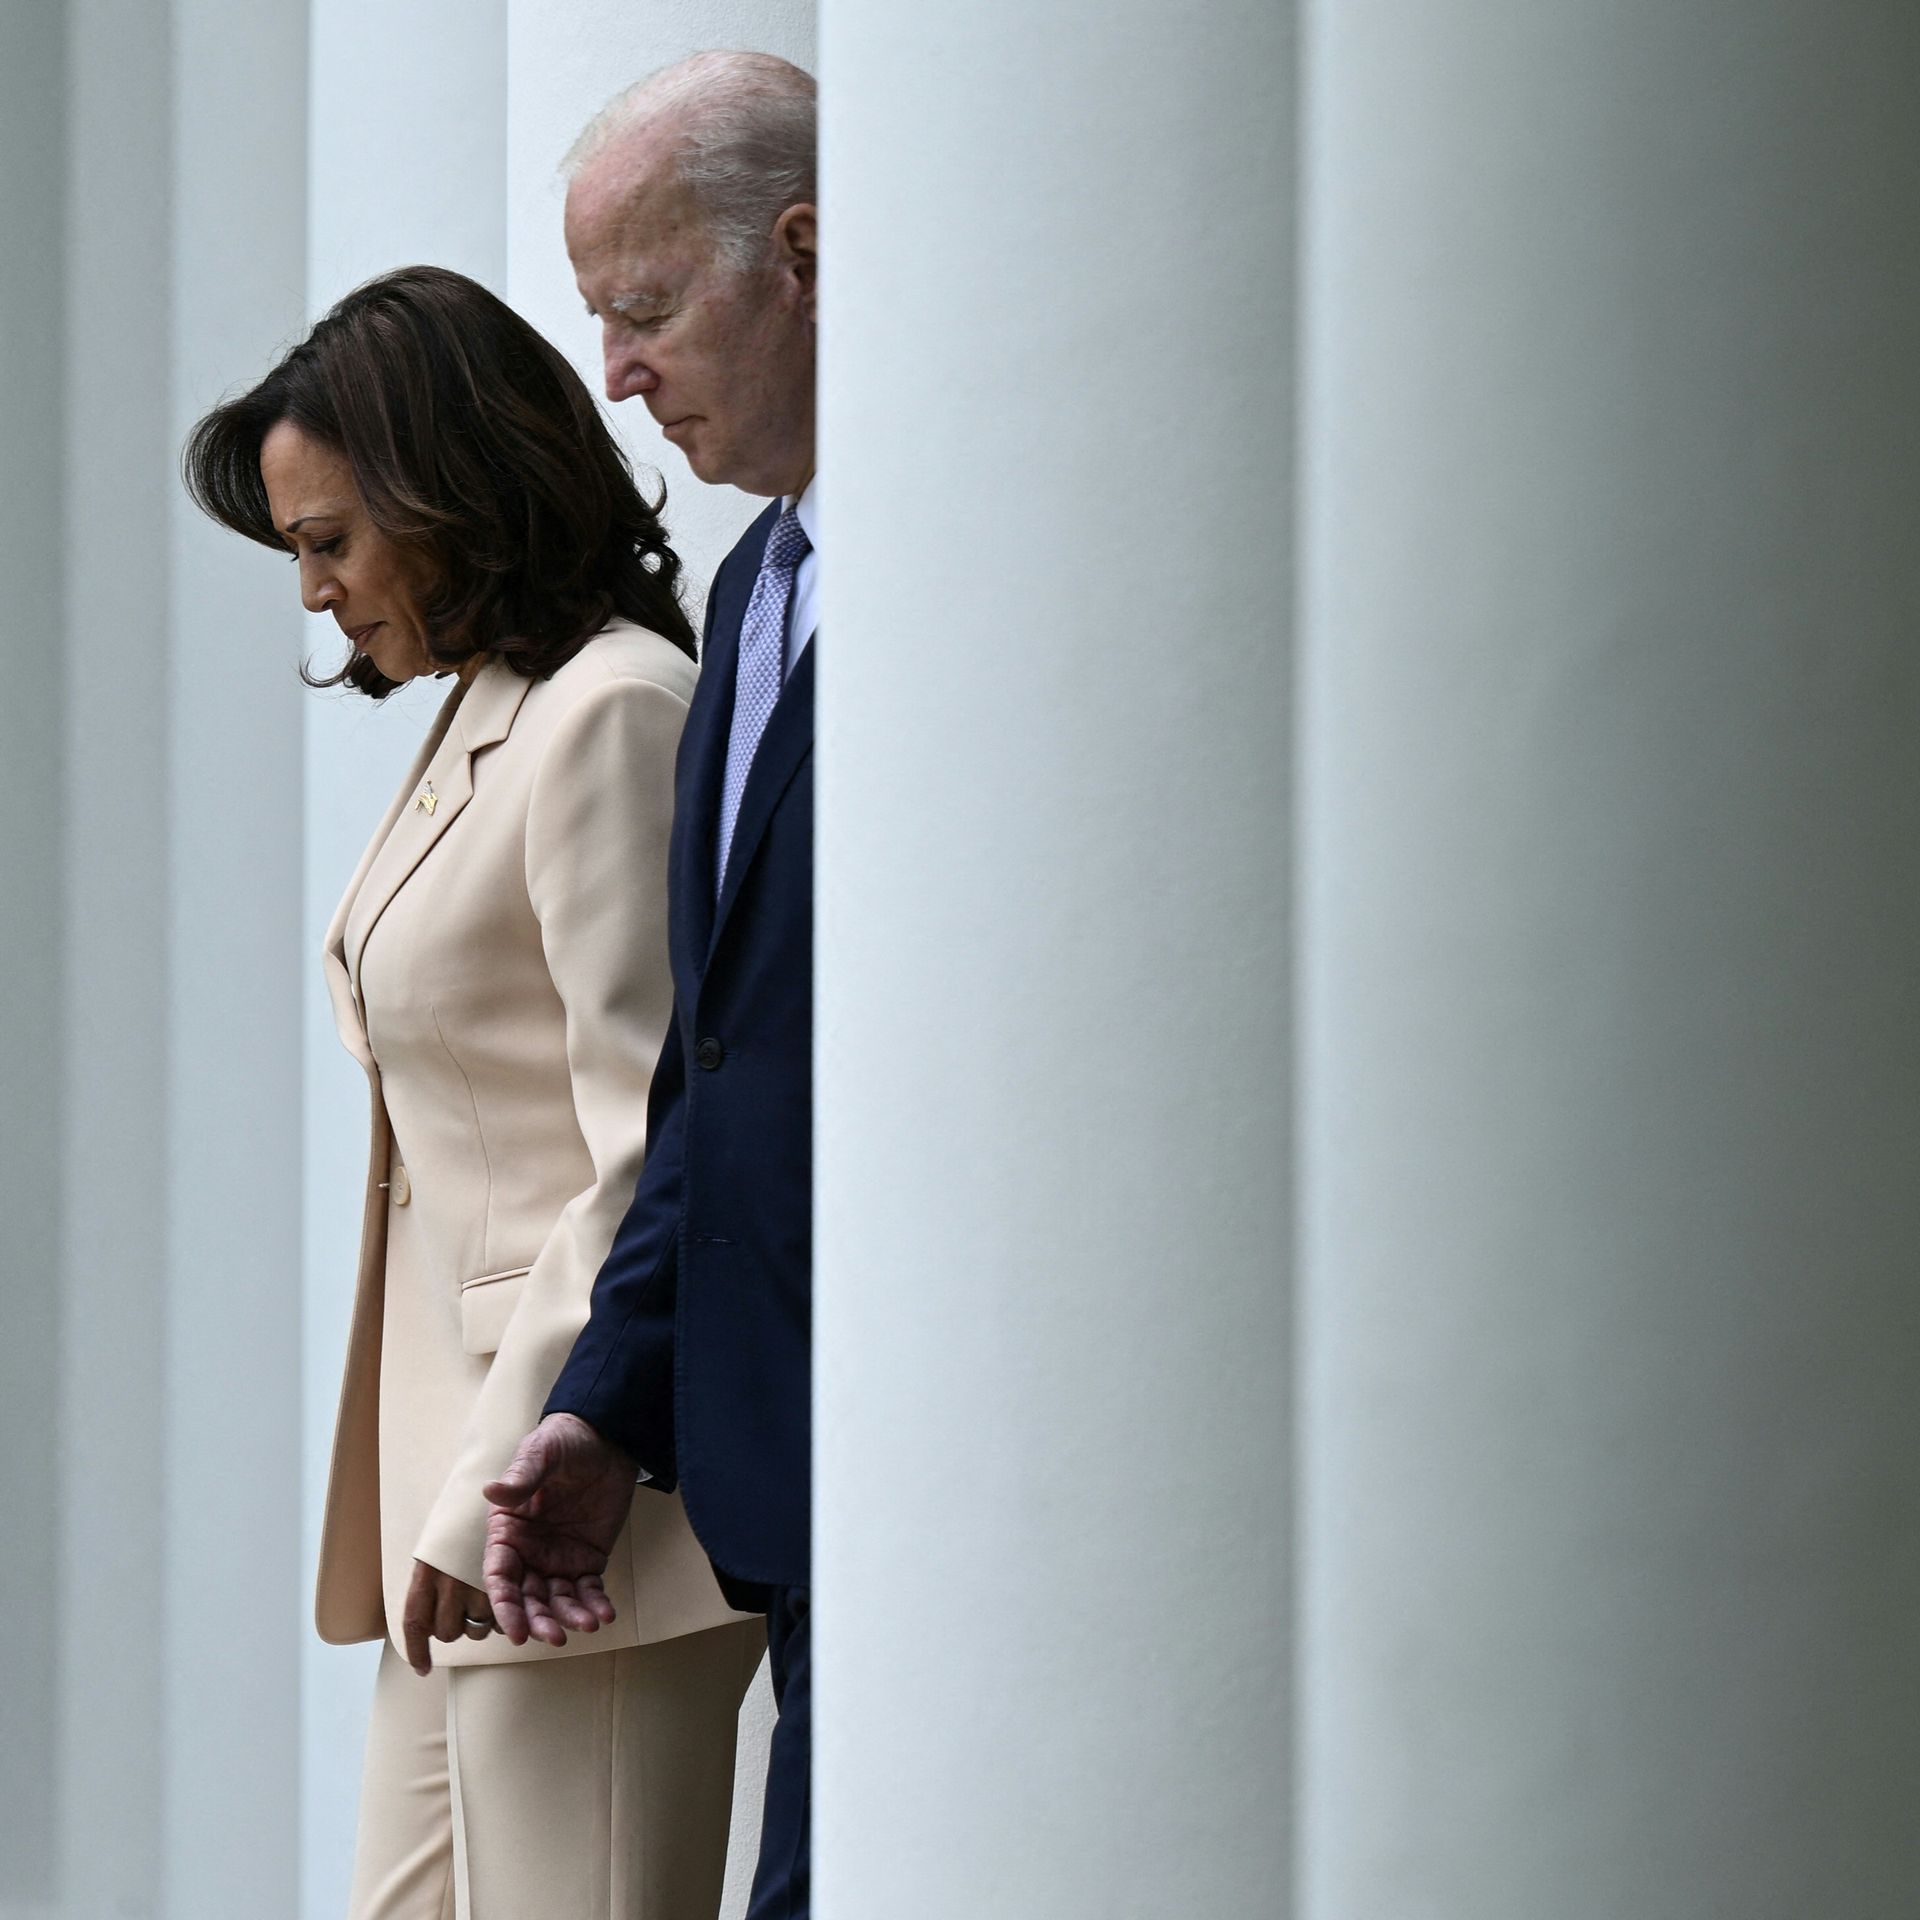 Vice President Harris and President Biden arrive to deliver remarks in the Rose Garden of the White House in Washington, D.C. Photo: Brendan SMIALOWSKI / AFP via Getty Images